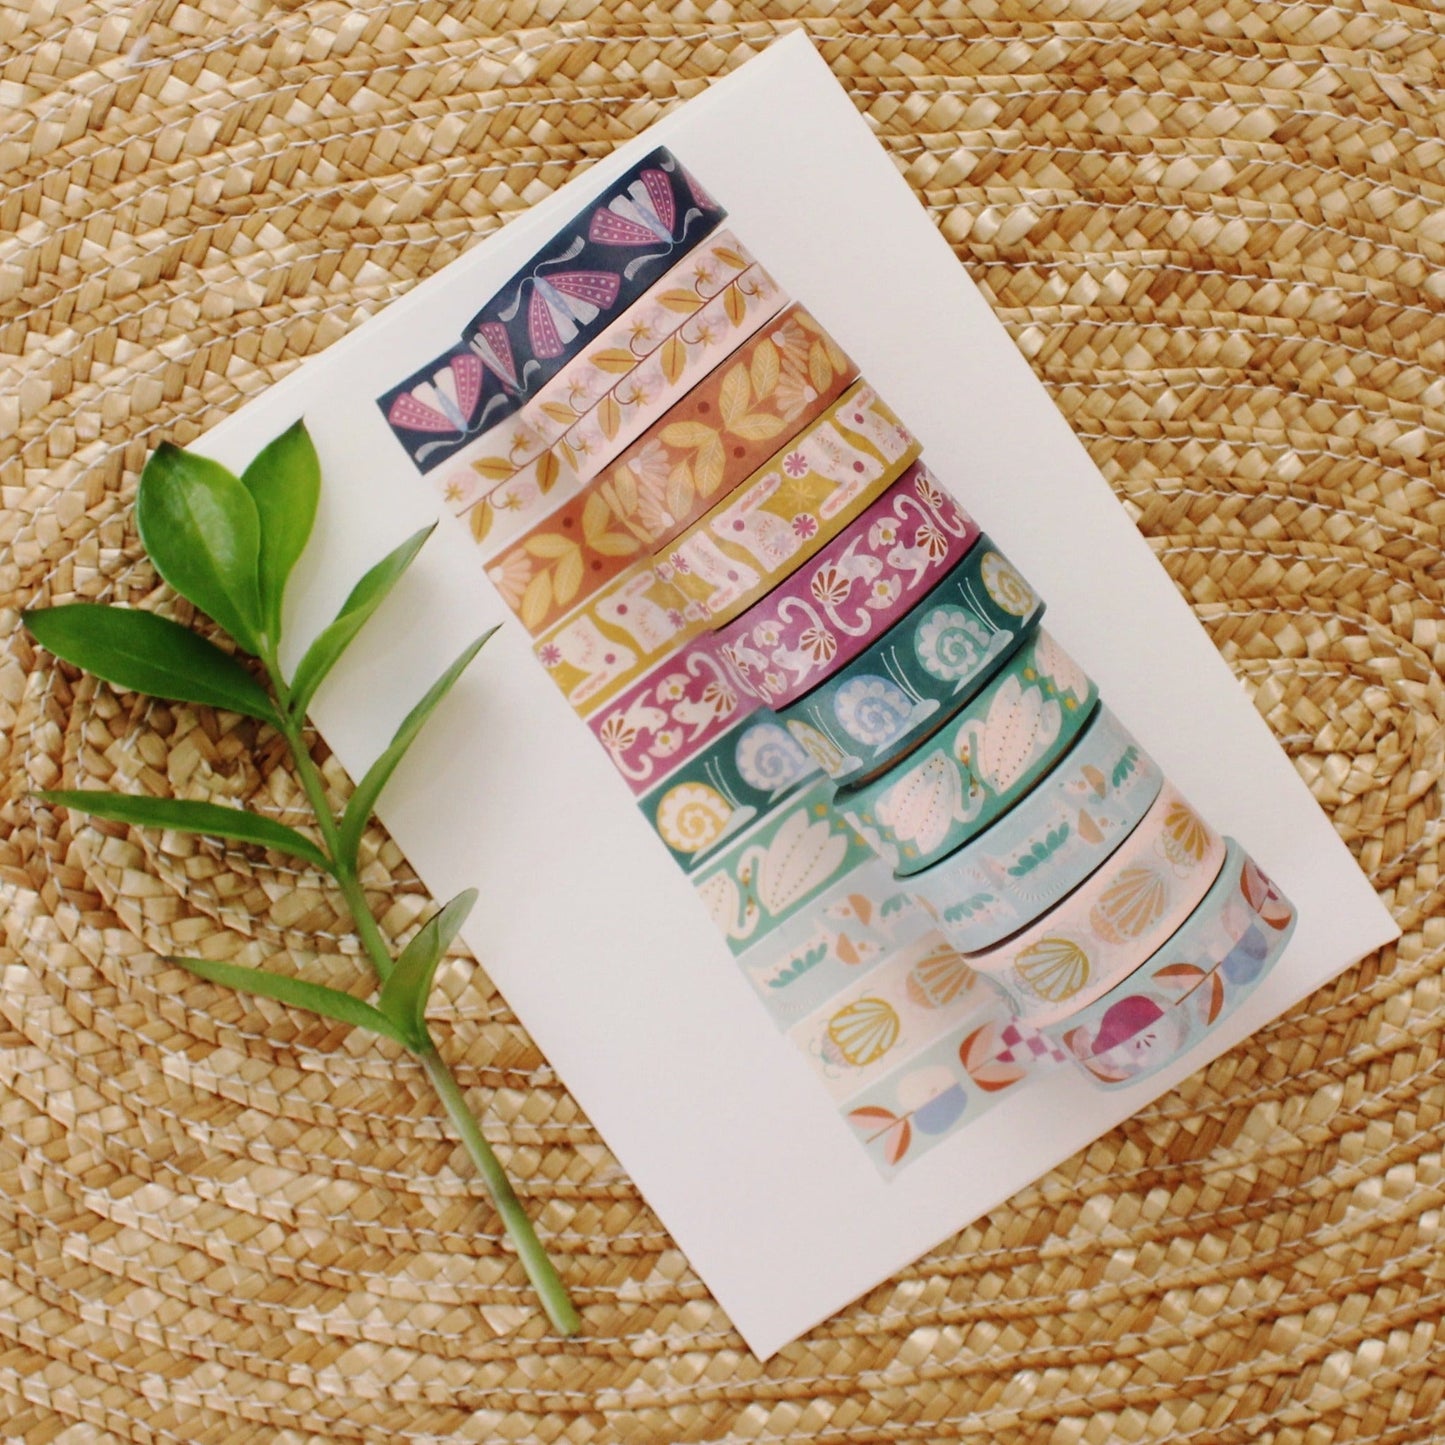 assorted washi tape illustrated with flowers, animals, and insects. cheerful and colorful.